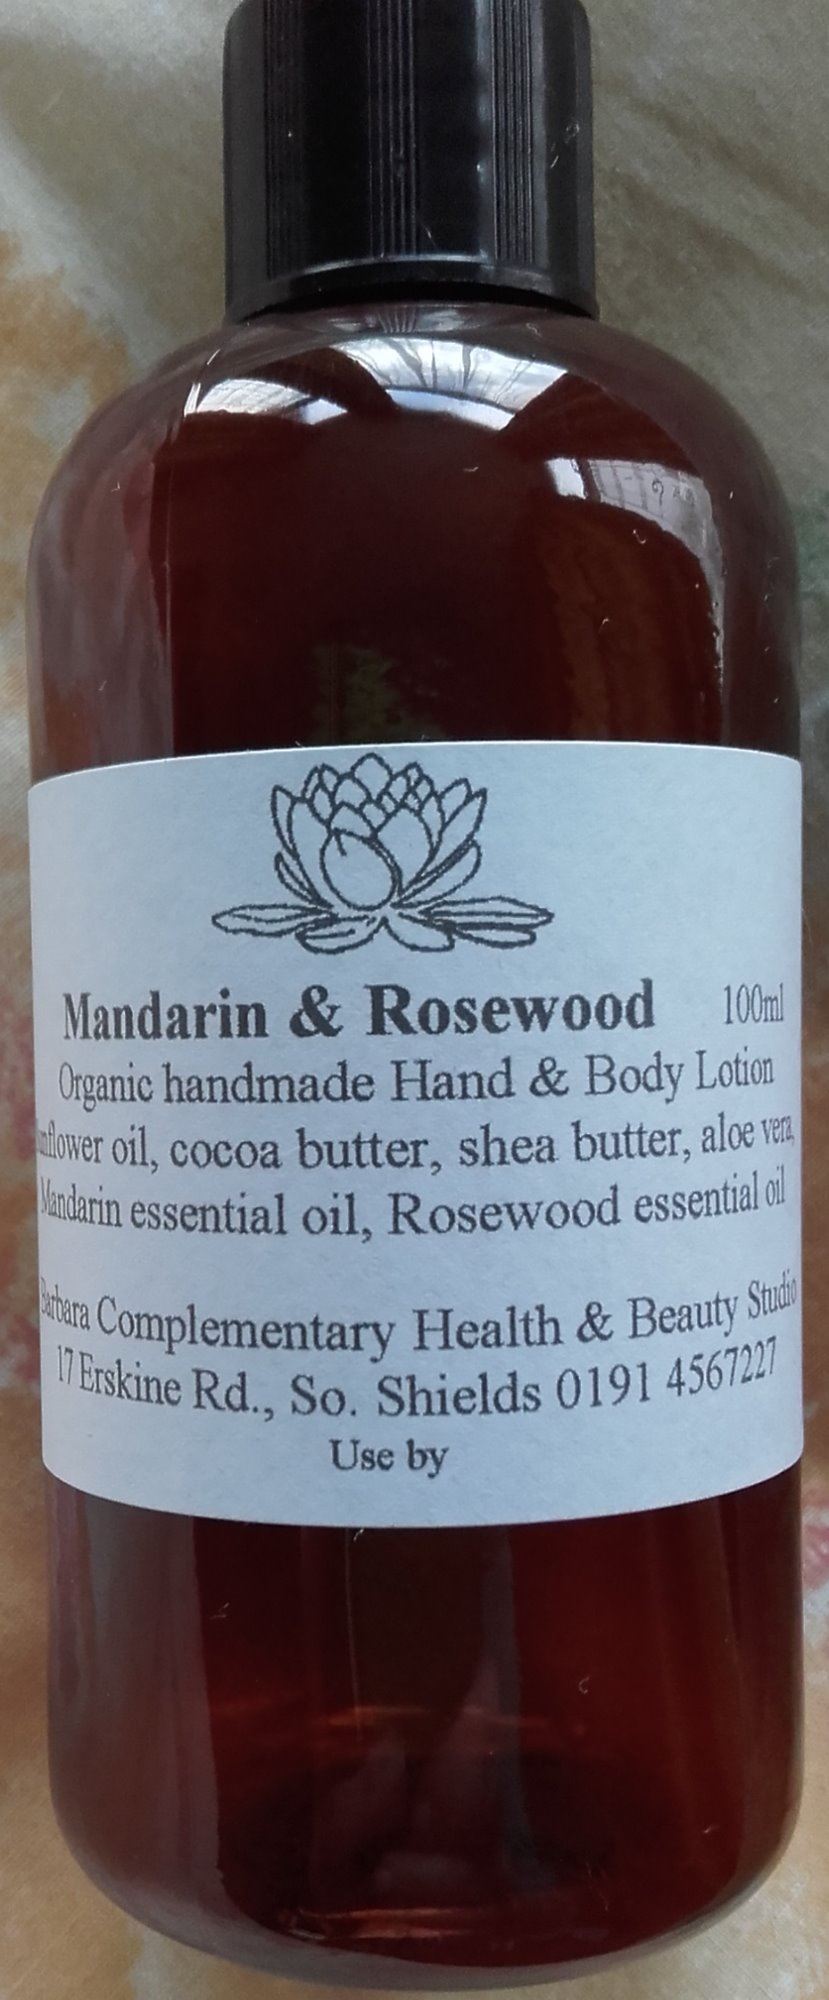 Mandarin & Rosewood Hand and Body Lotion